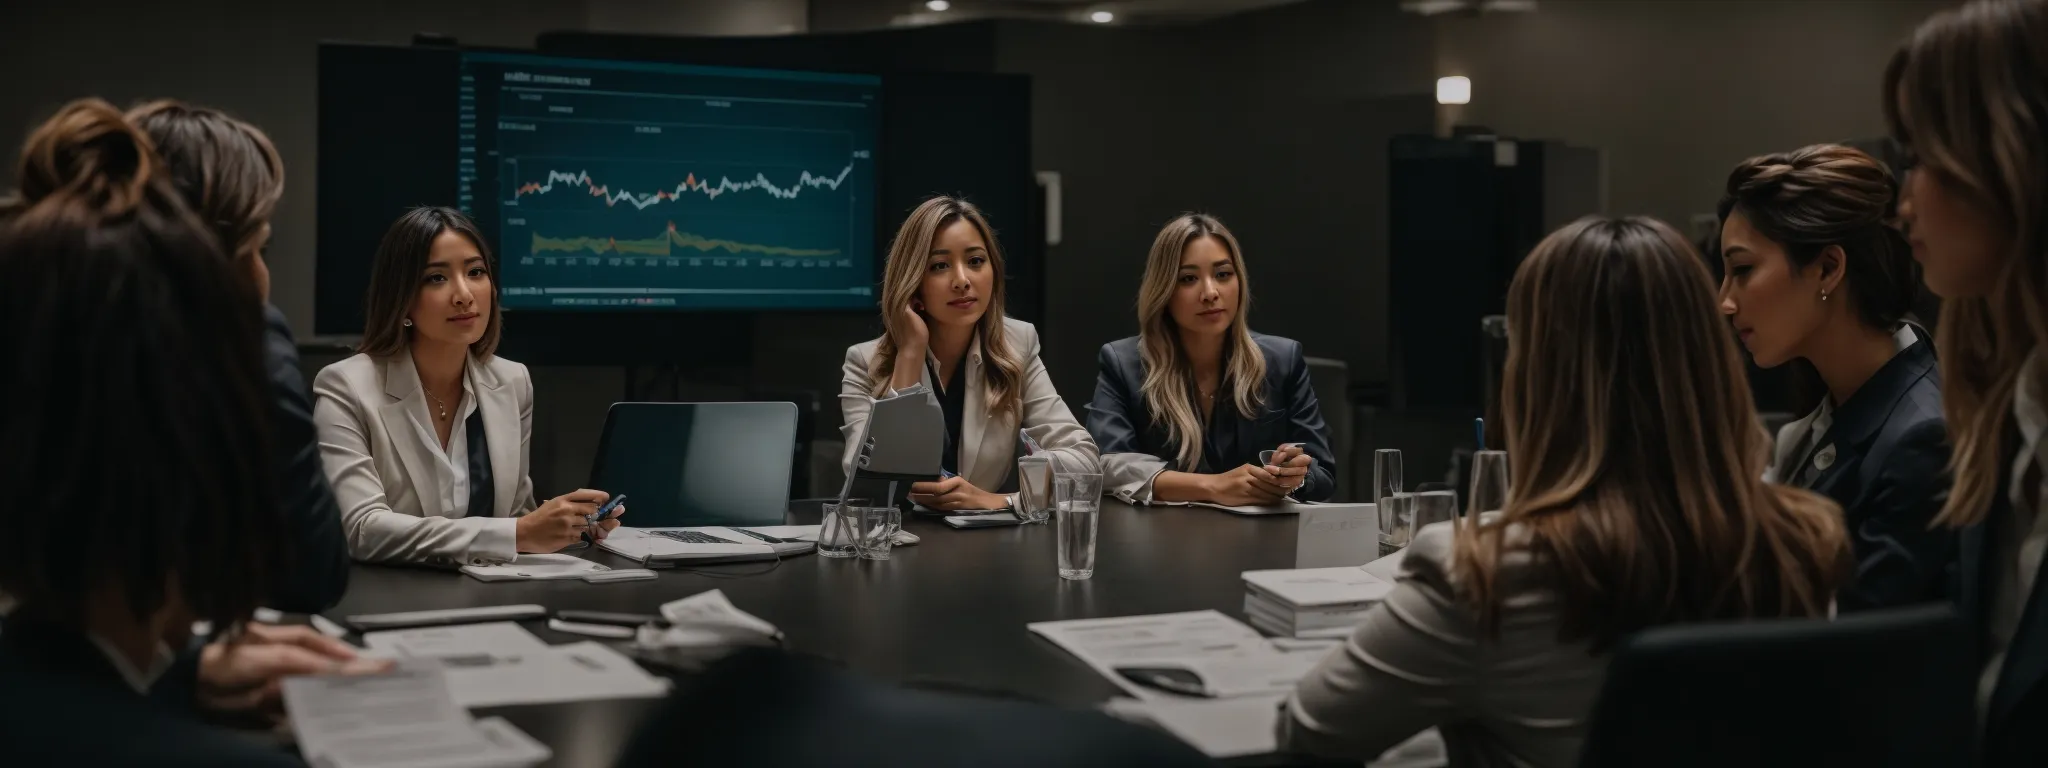 a group of professional women at a digital marketing conference discussing strategies around a large monitor displaying analytical charts.